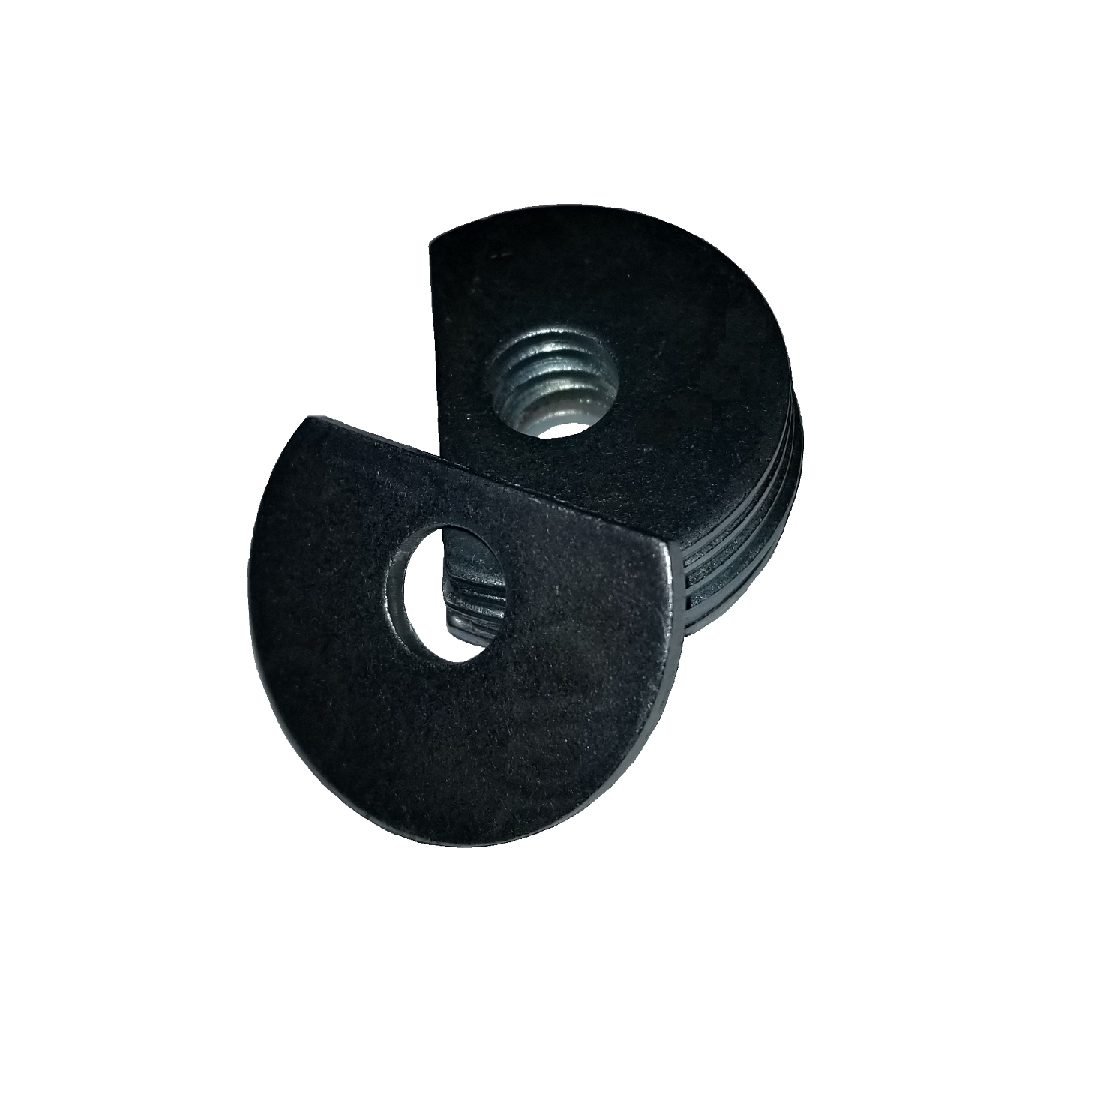 Clipped OD Washer - 0.765 ID, 2.485 OD, 0.250 Thick, Low Carbon Steel - Soft